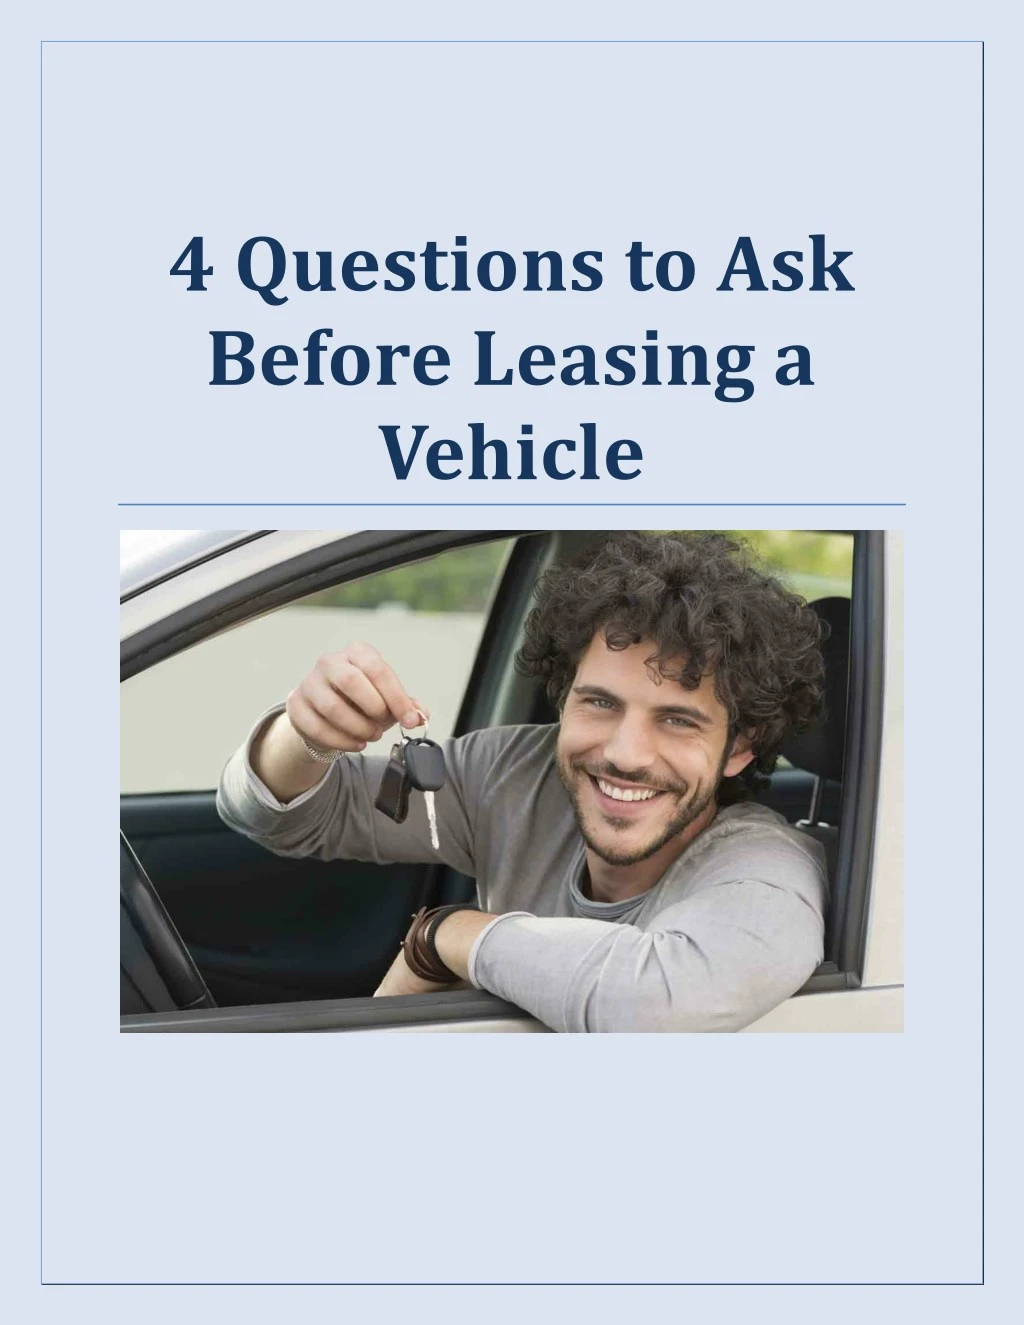 4 questions to ask before leasing a vehicle